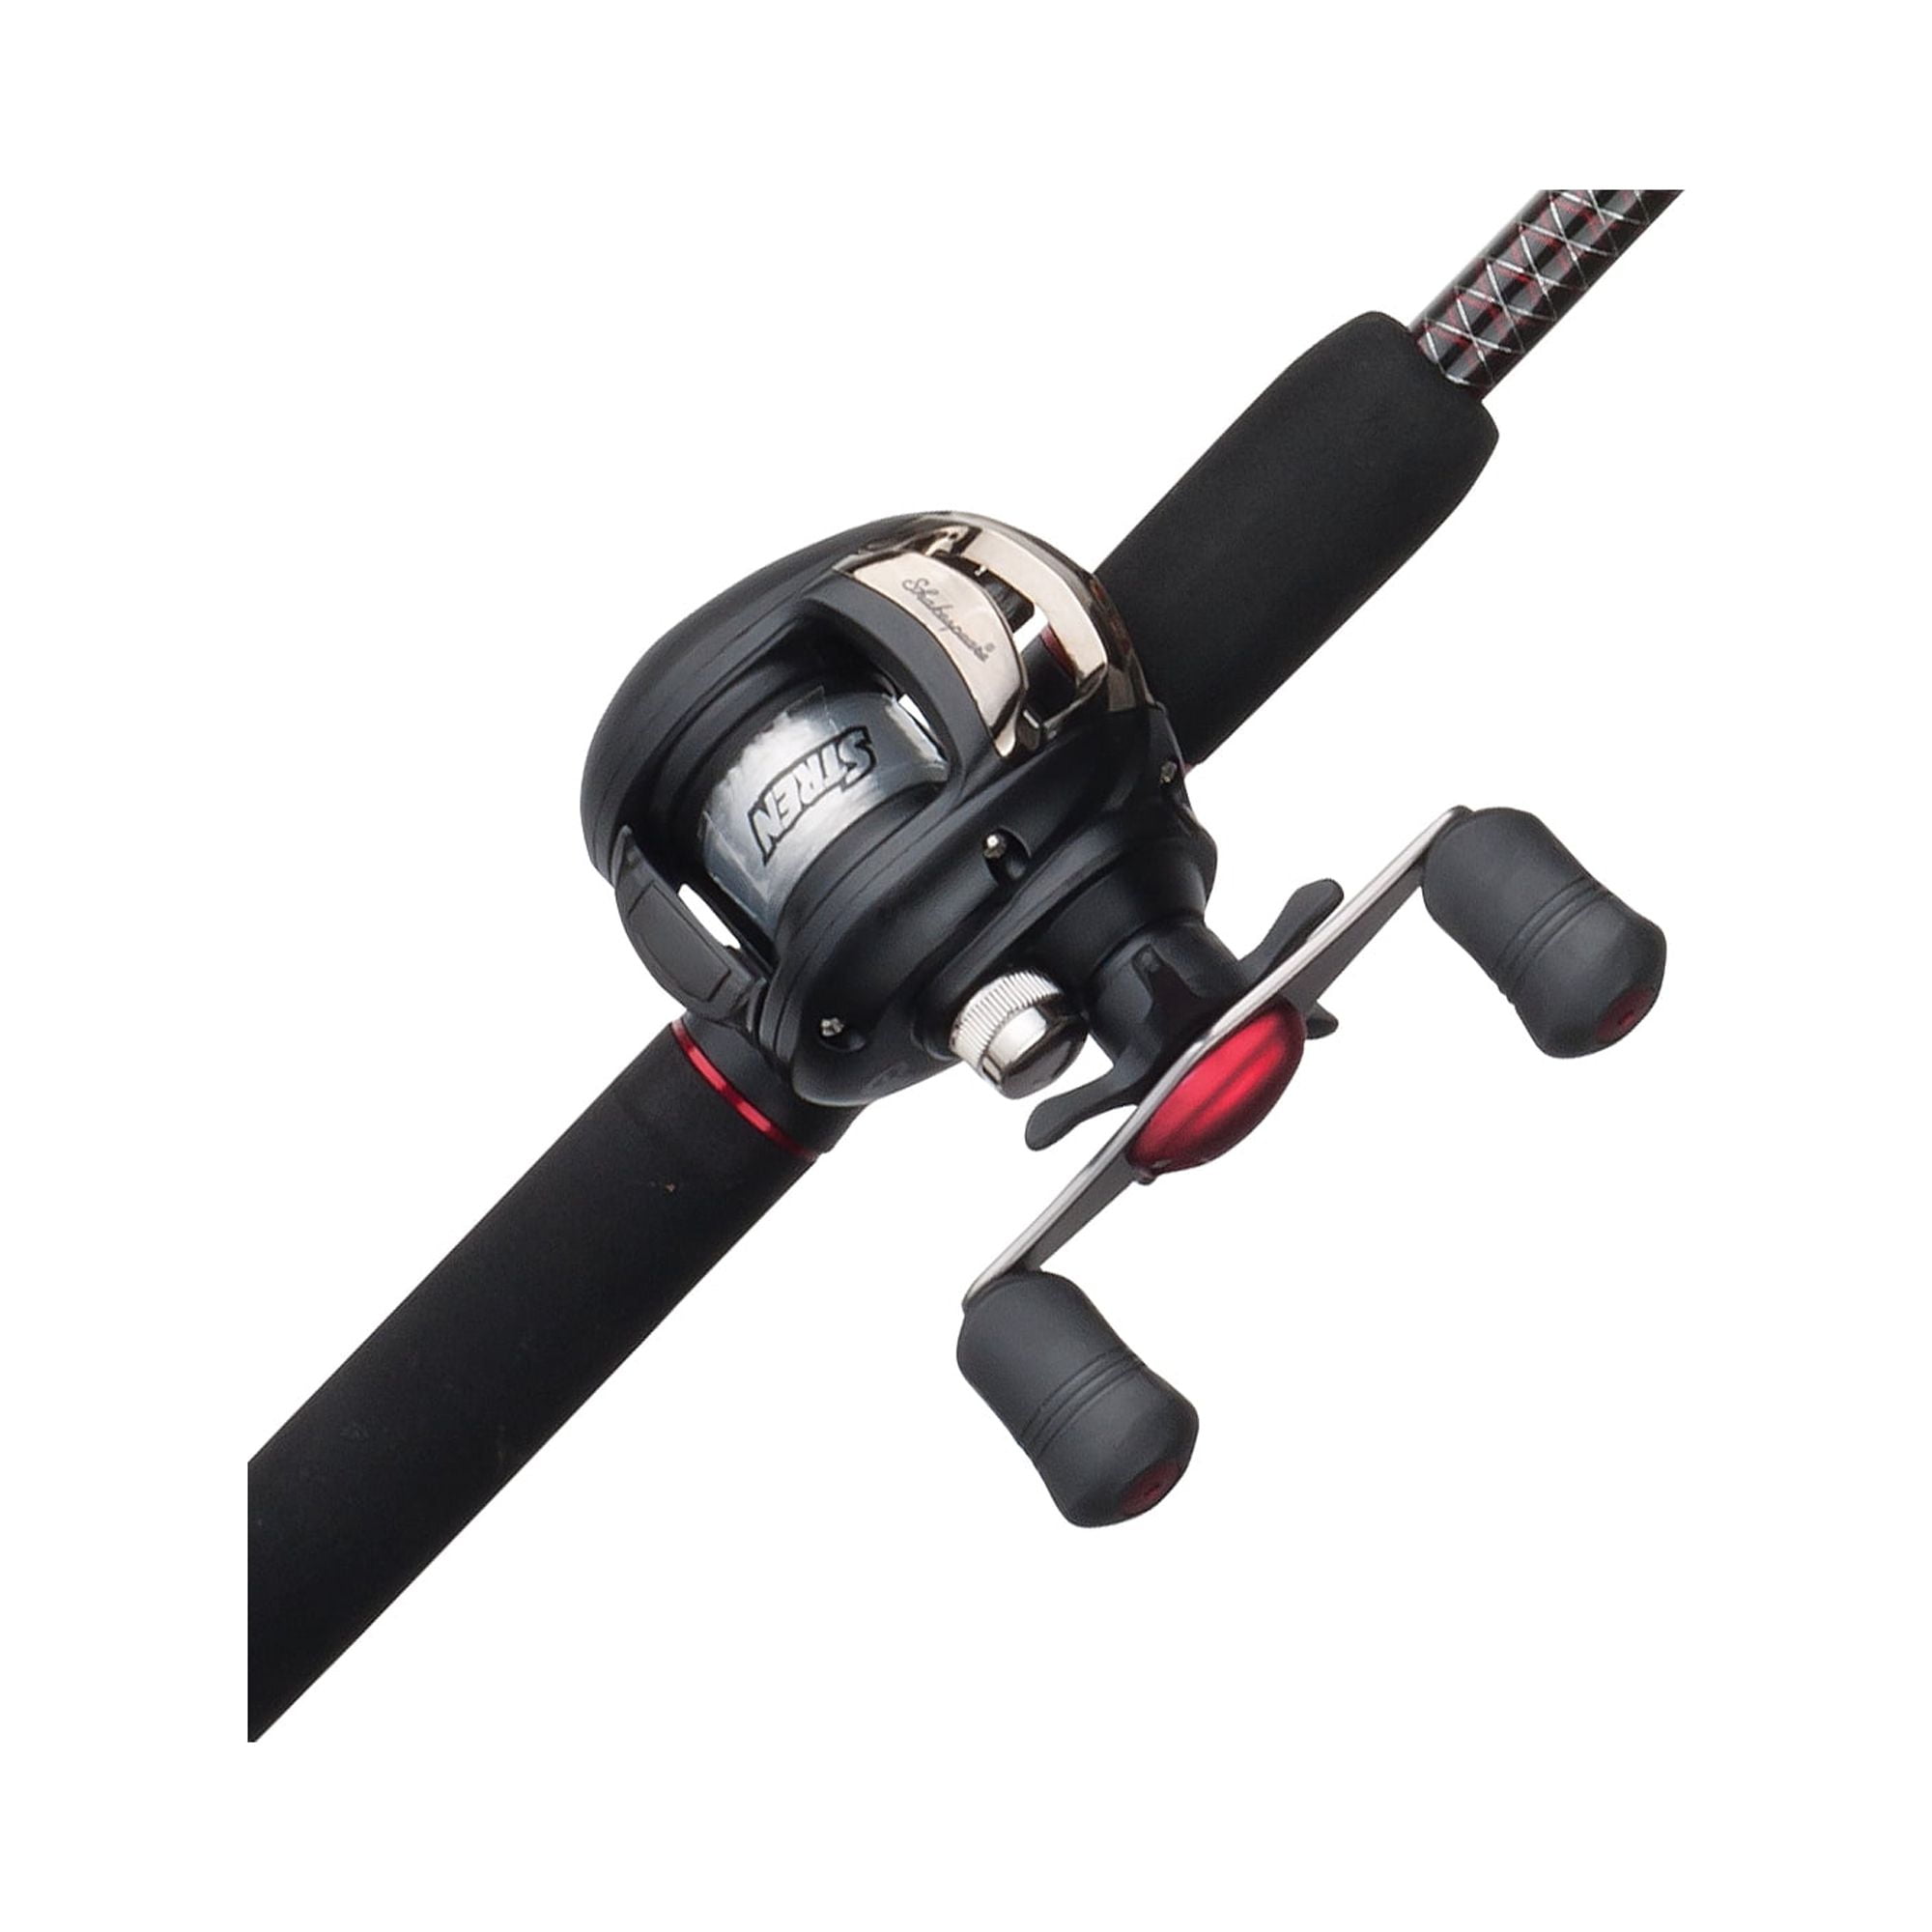 One Bass Fishing Rod Reel Combo, Baitcasting Fishing Pole with Graphite 2Pc  Blanks